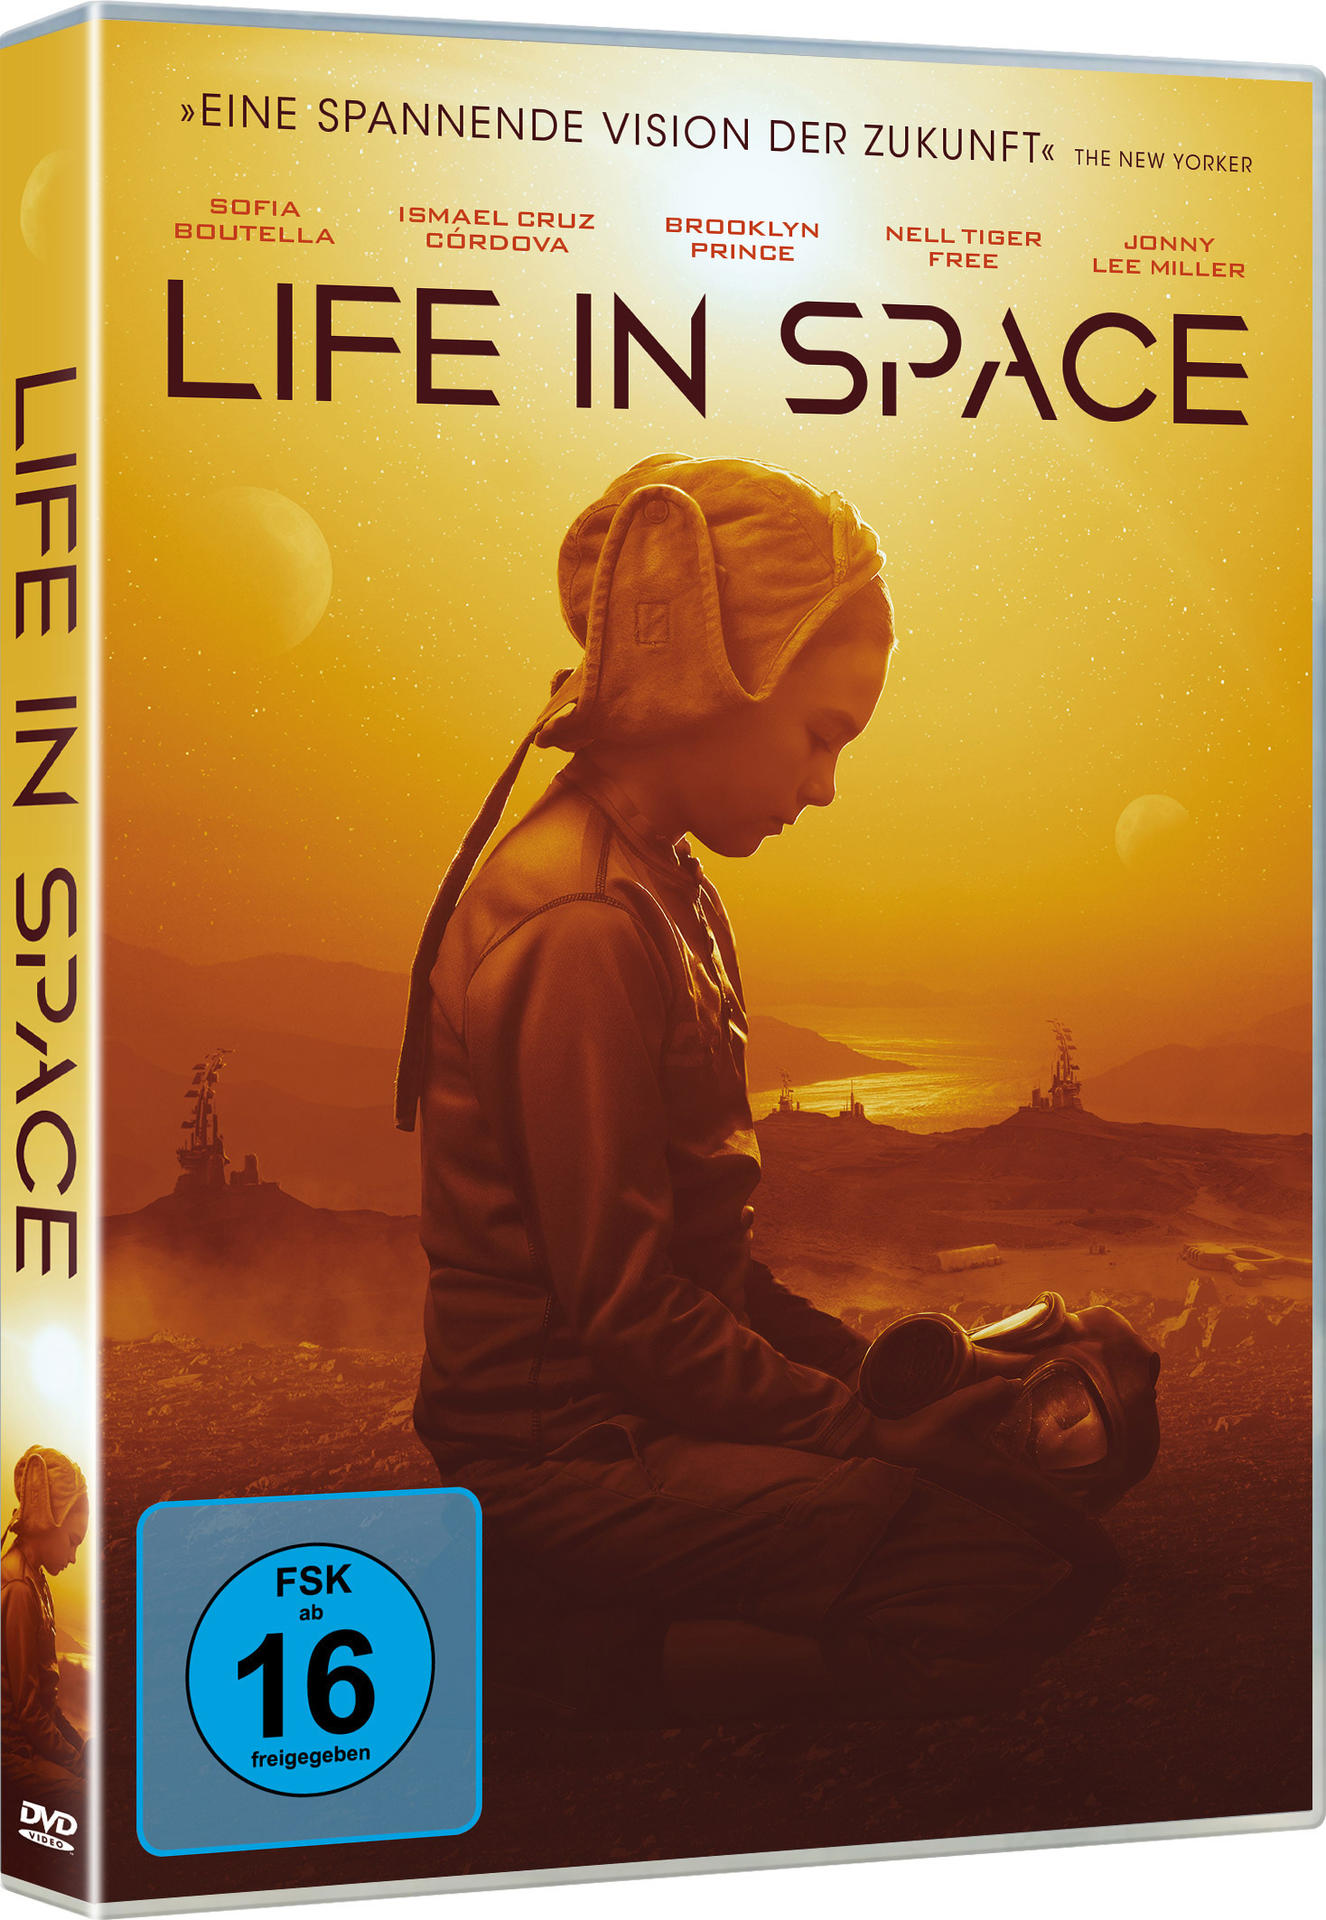 Space in DVD Life